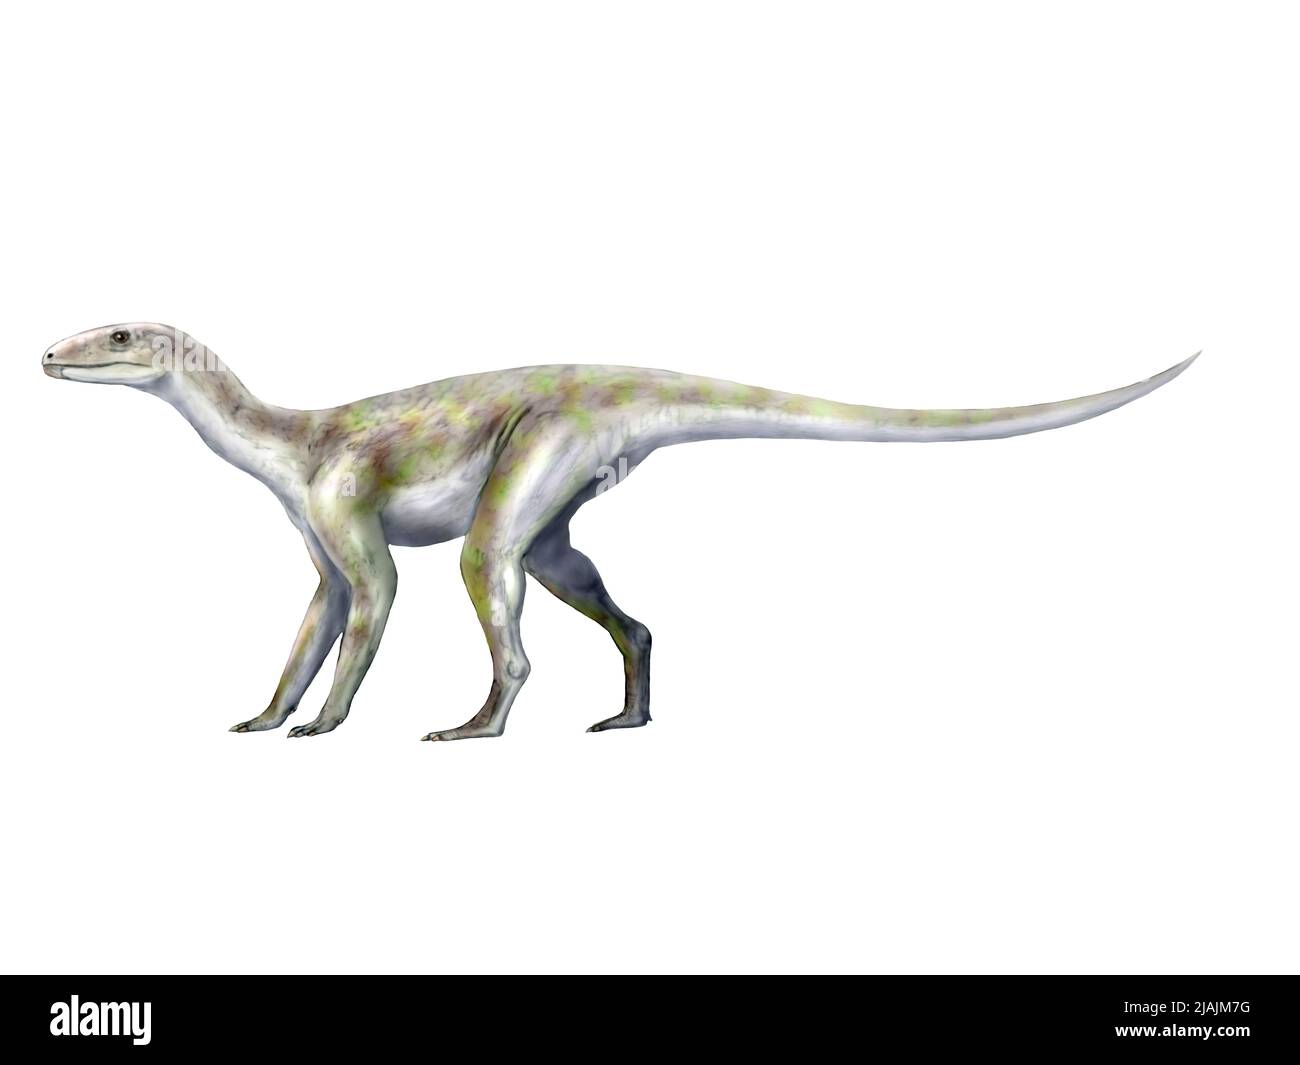 Silesaurus opolensis, a dinosauriformes from the Late Triassic period of Poland. Stock Photo